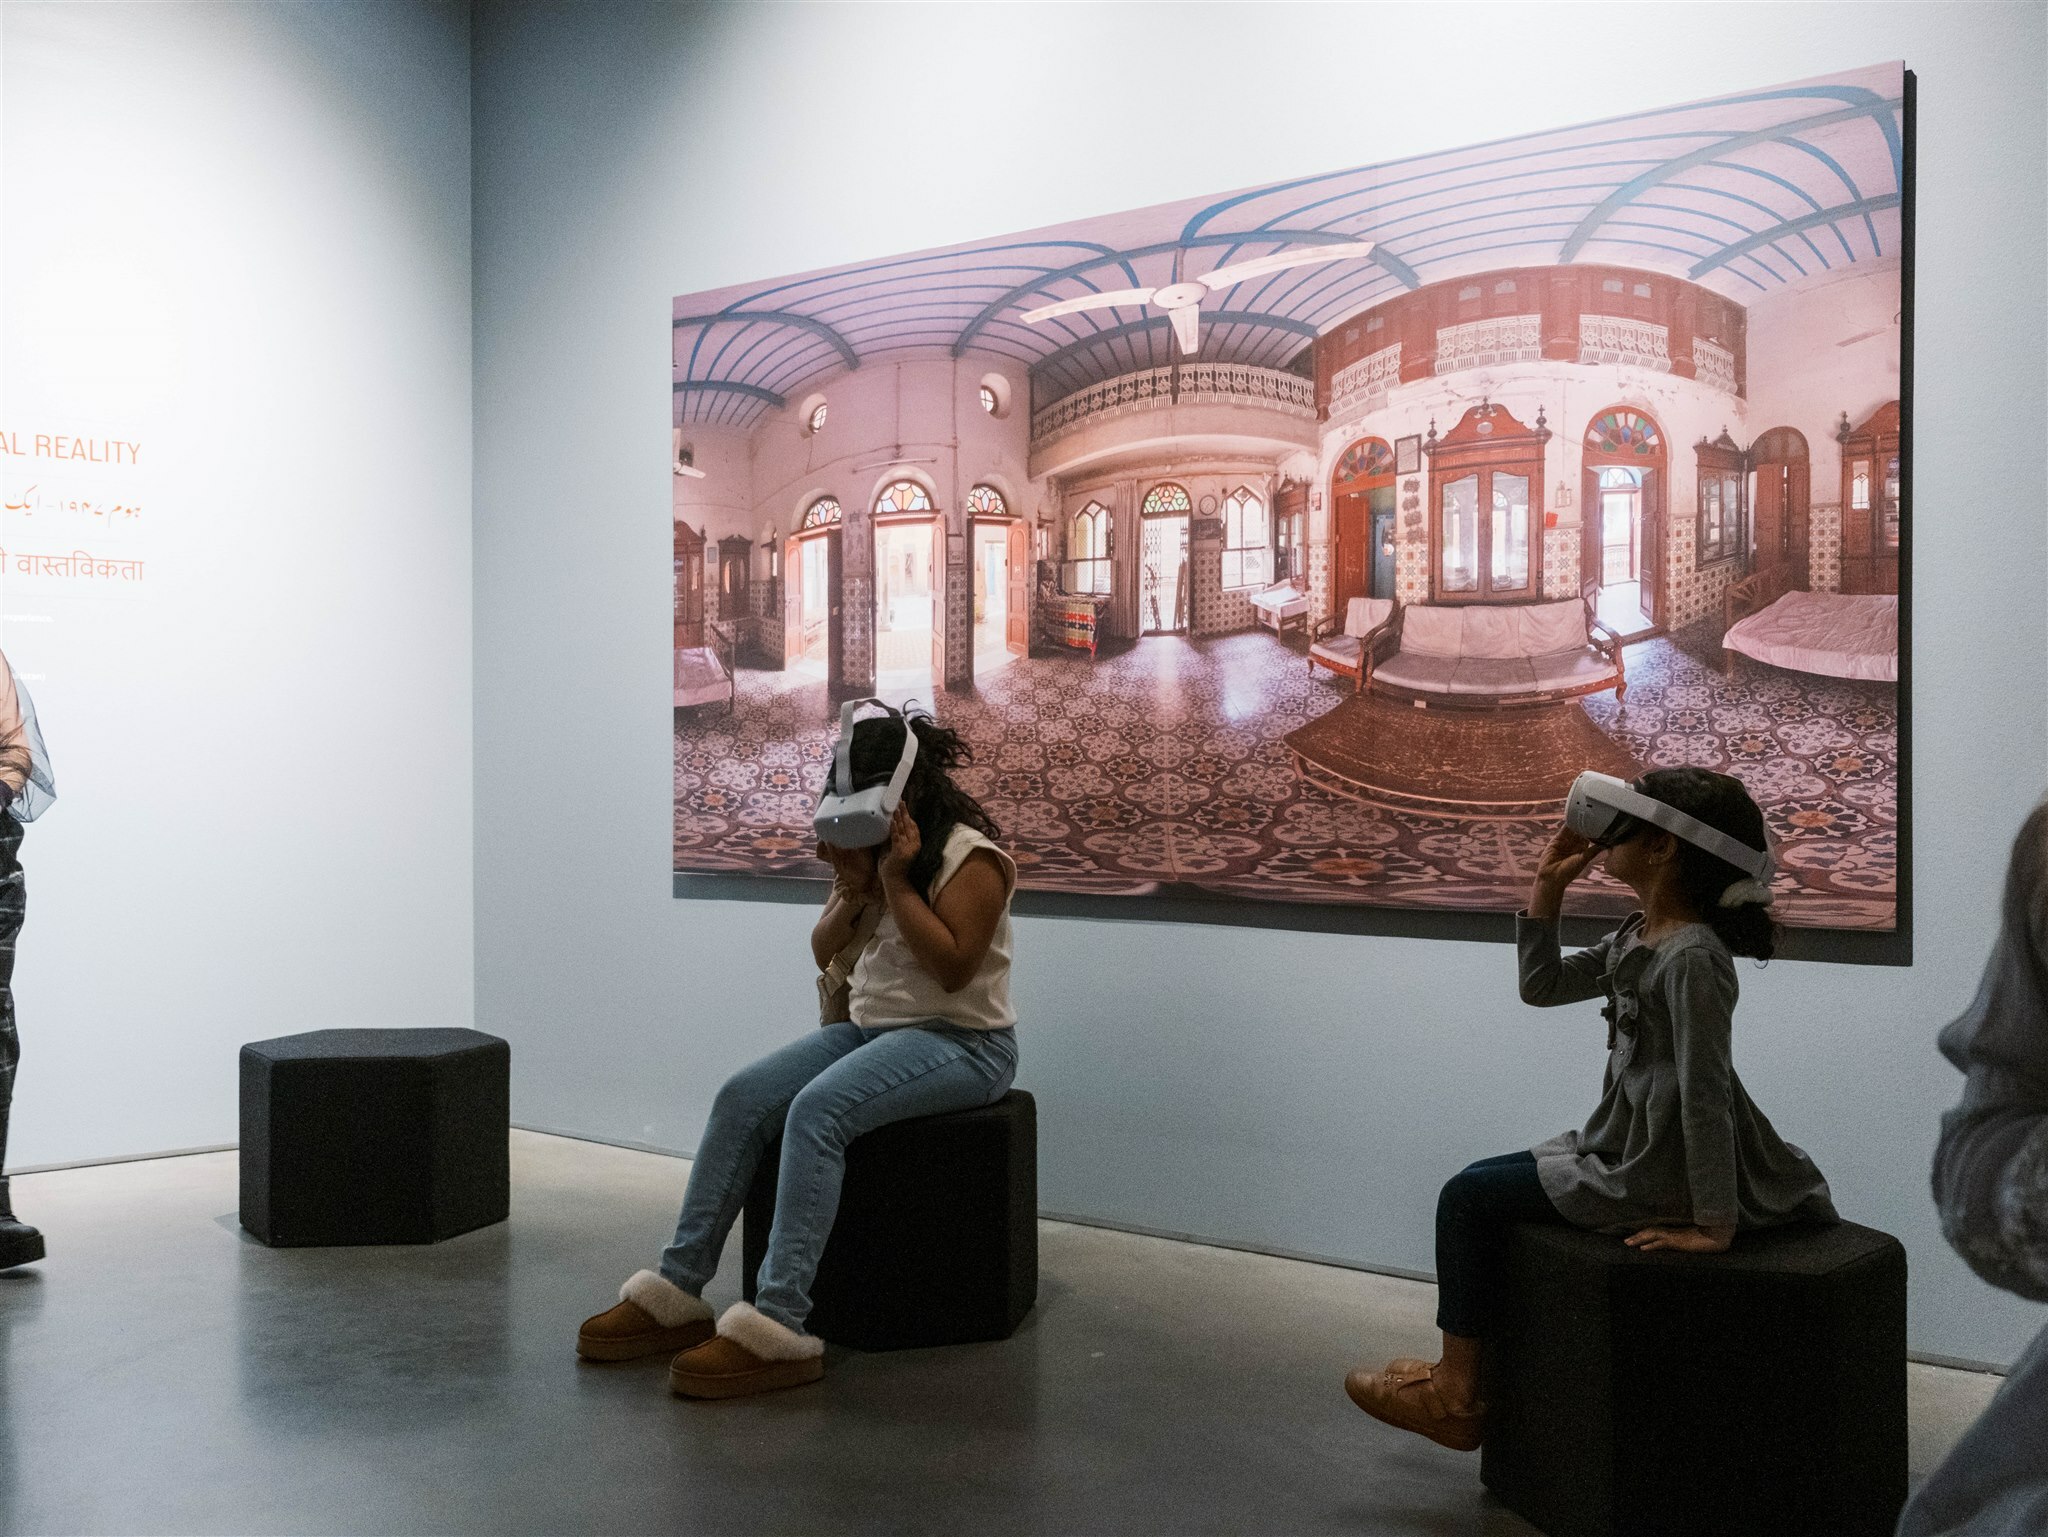 Two children sit on circular black stools in front of a large painting of a colorful interior hospital in Pakistan. The two kids have virtual reality headsets on.